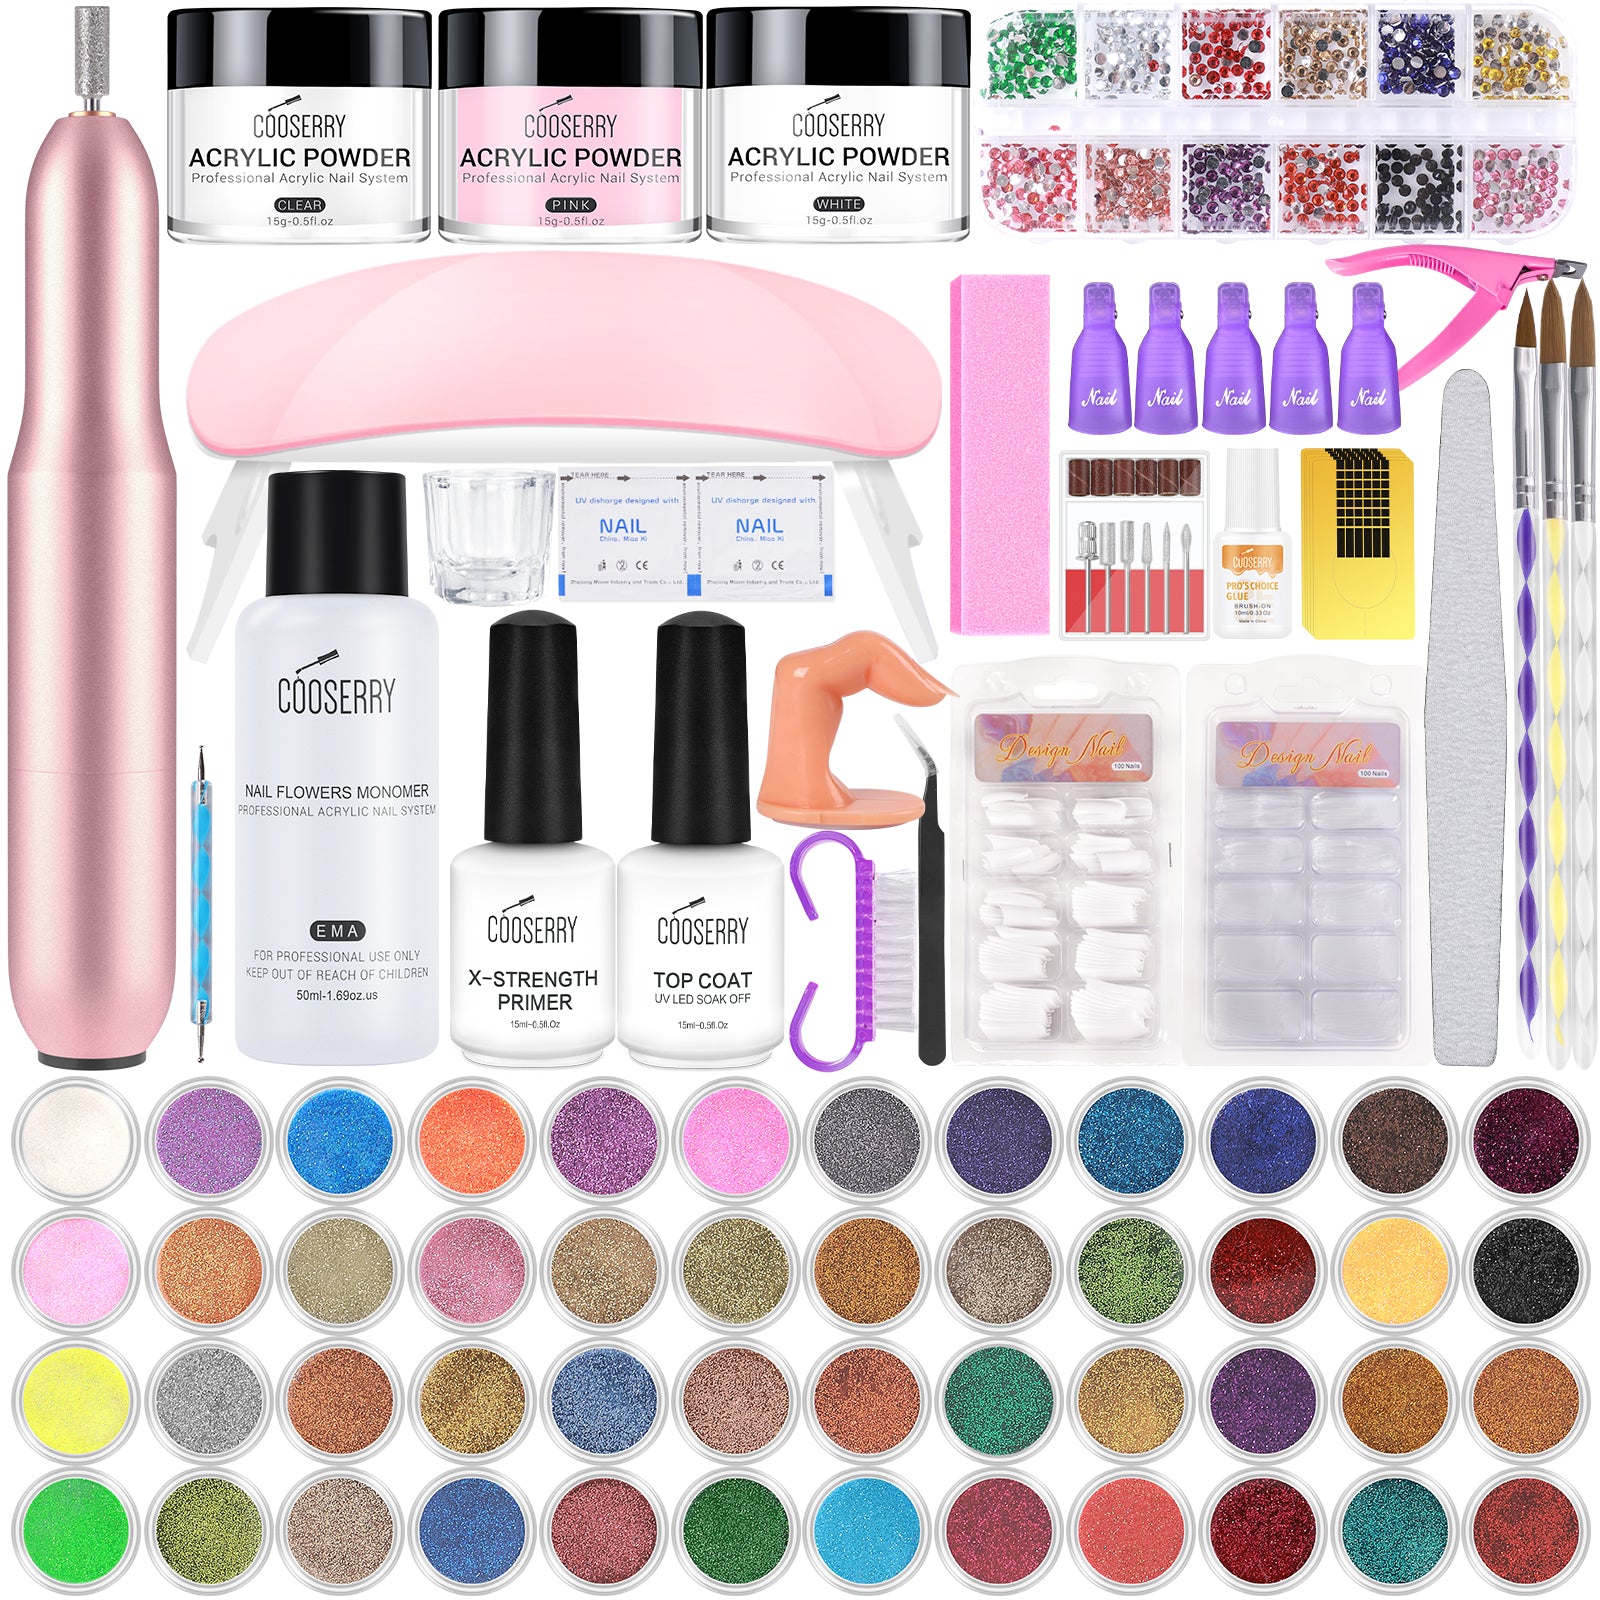 Acrylic Nail Kit for Beginners - Acrylic Powder and Liquid Set with Primer  Nail Tips Glue Acrylic Brush Complete Starter Nails Kit Acrylic Set with